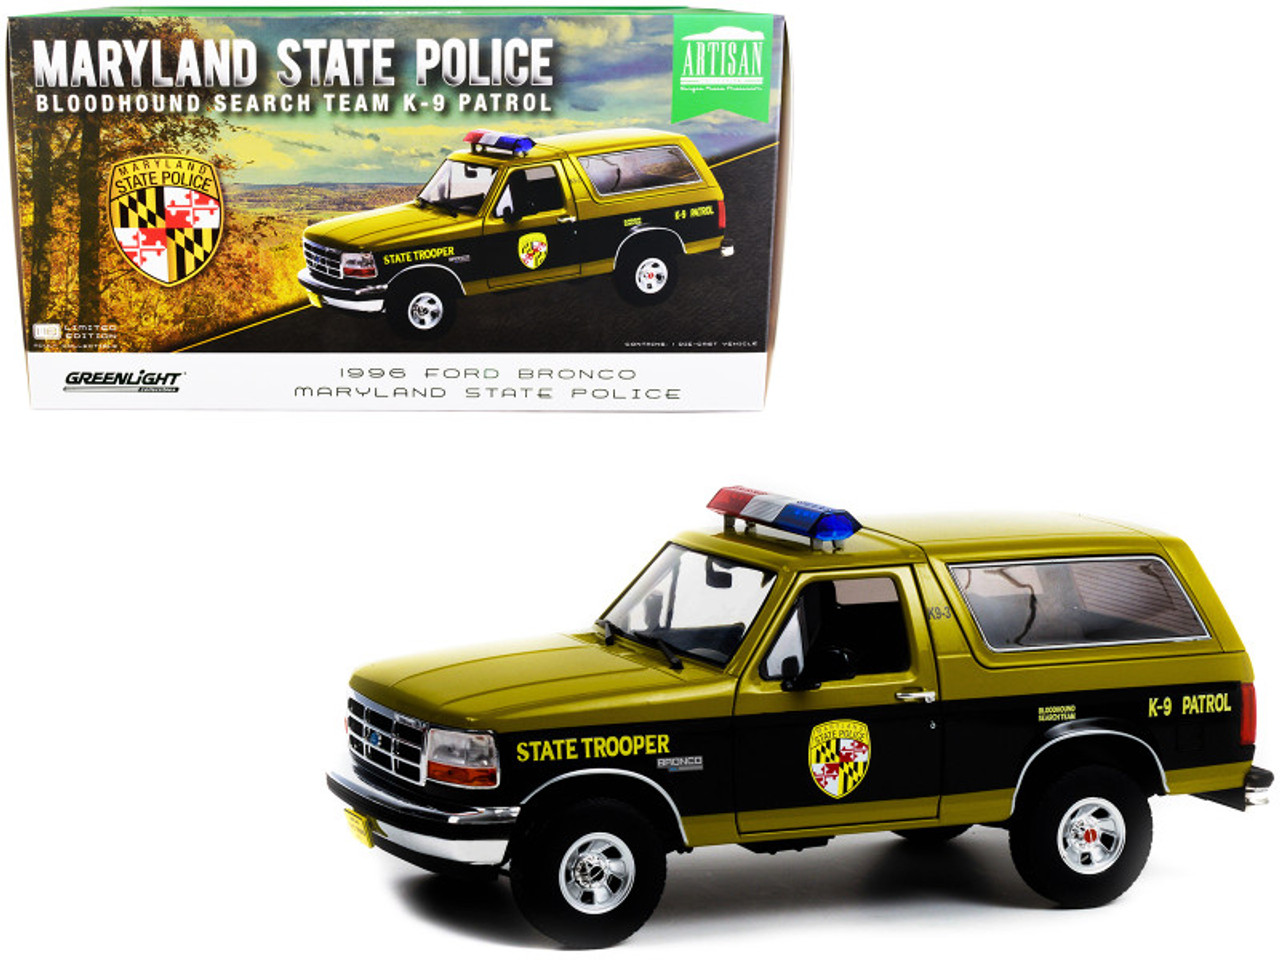 1/18 Greenlight 1996 Ford Bronco Maryland State Police State Trooper "Bloodhound Search Team - K-9 Patrol" "Artisan Collection" Diecast Car Model